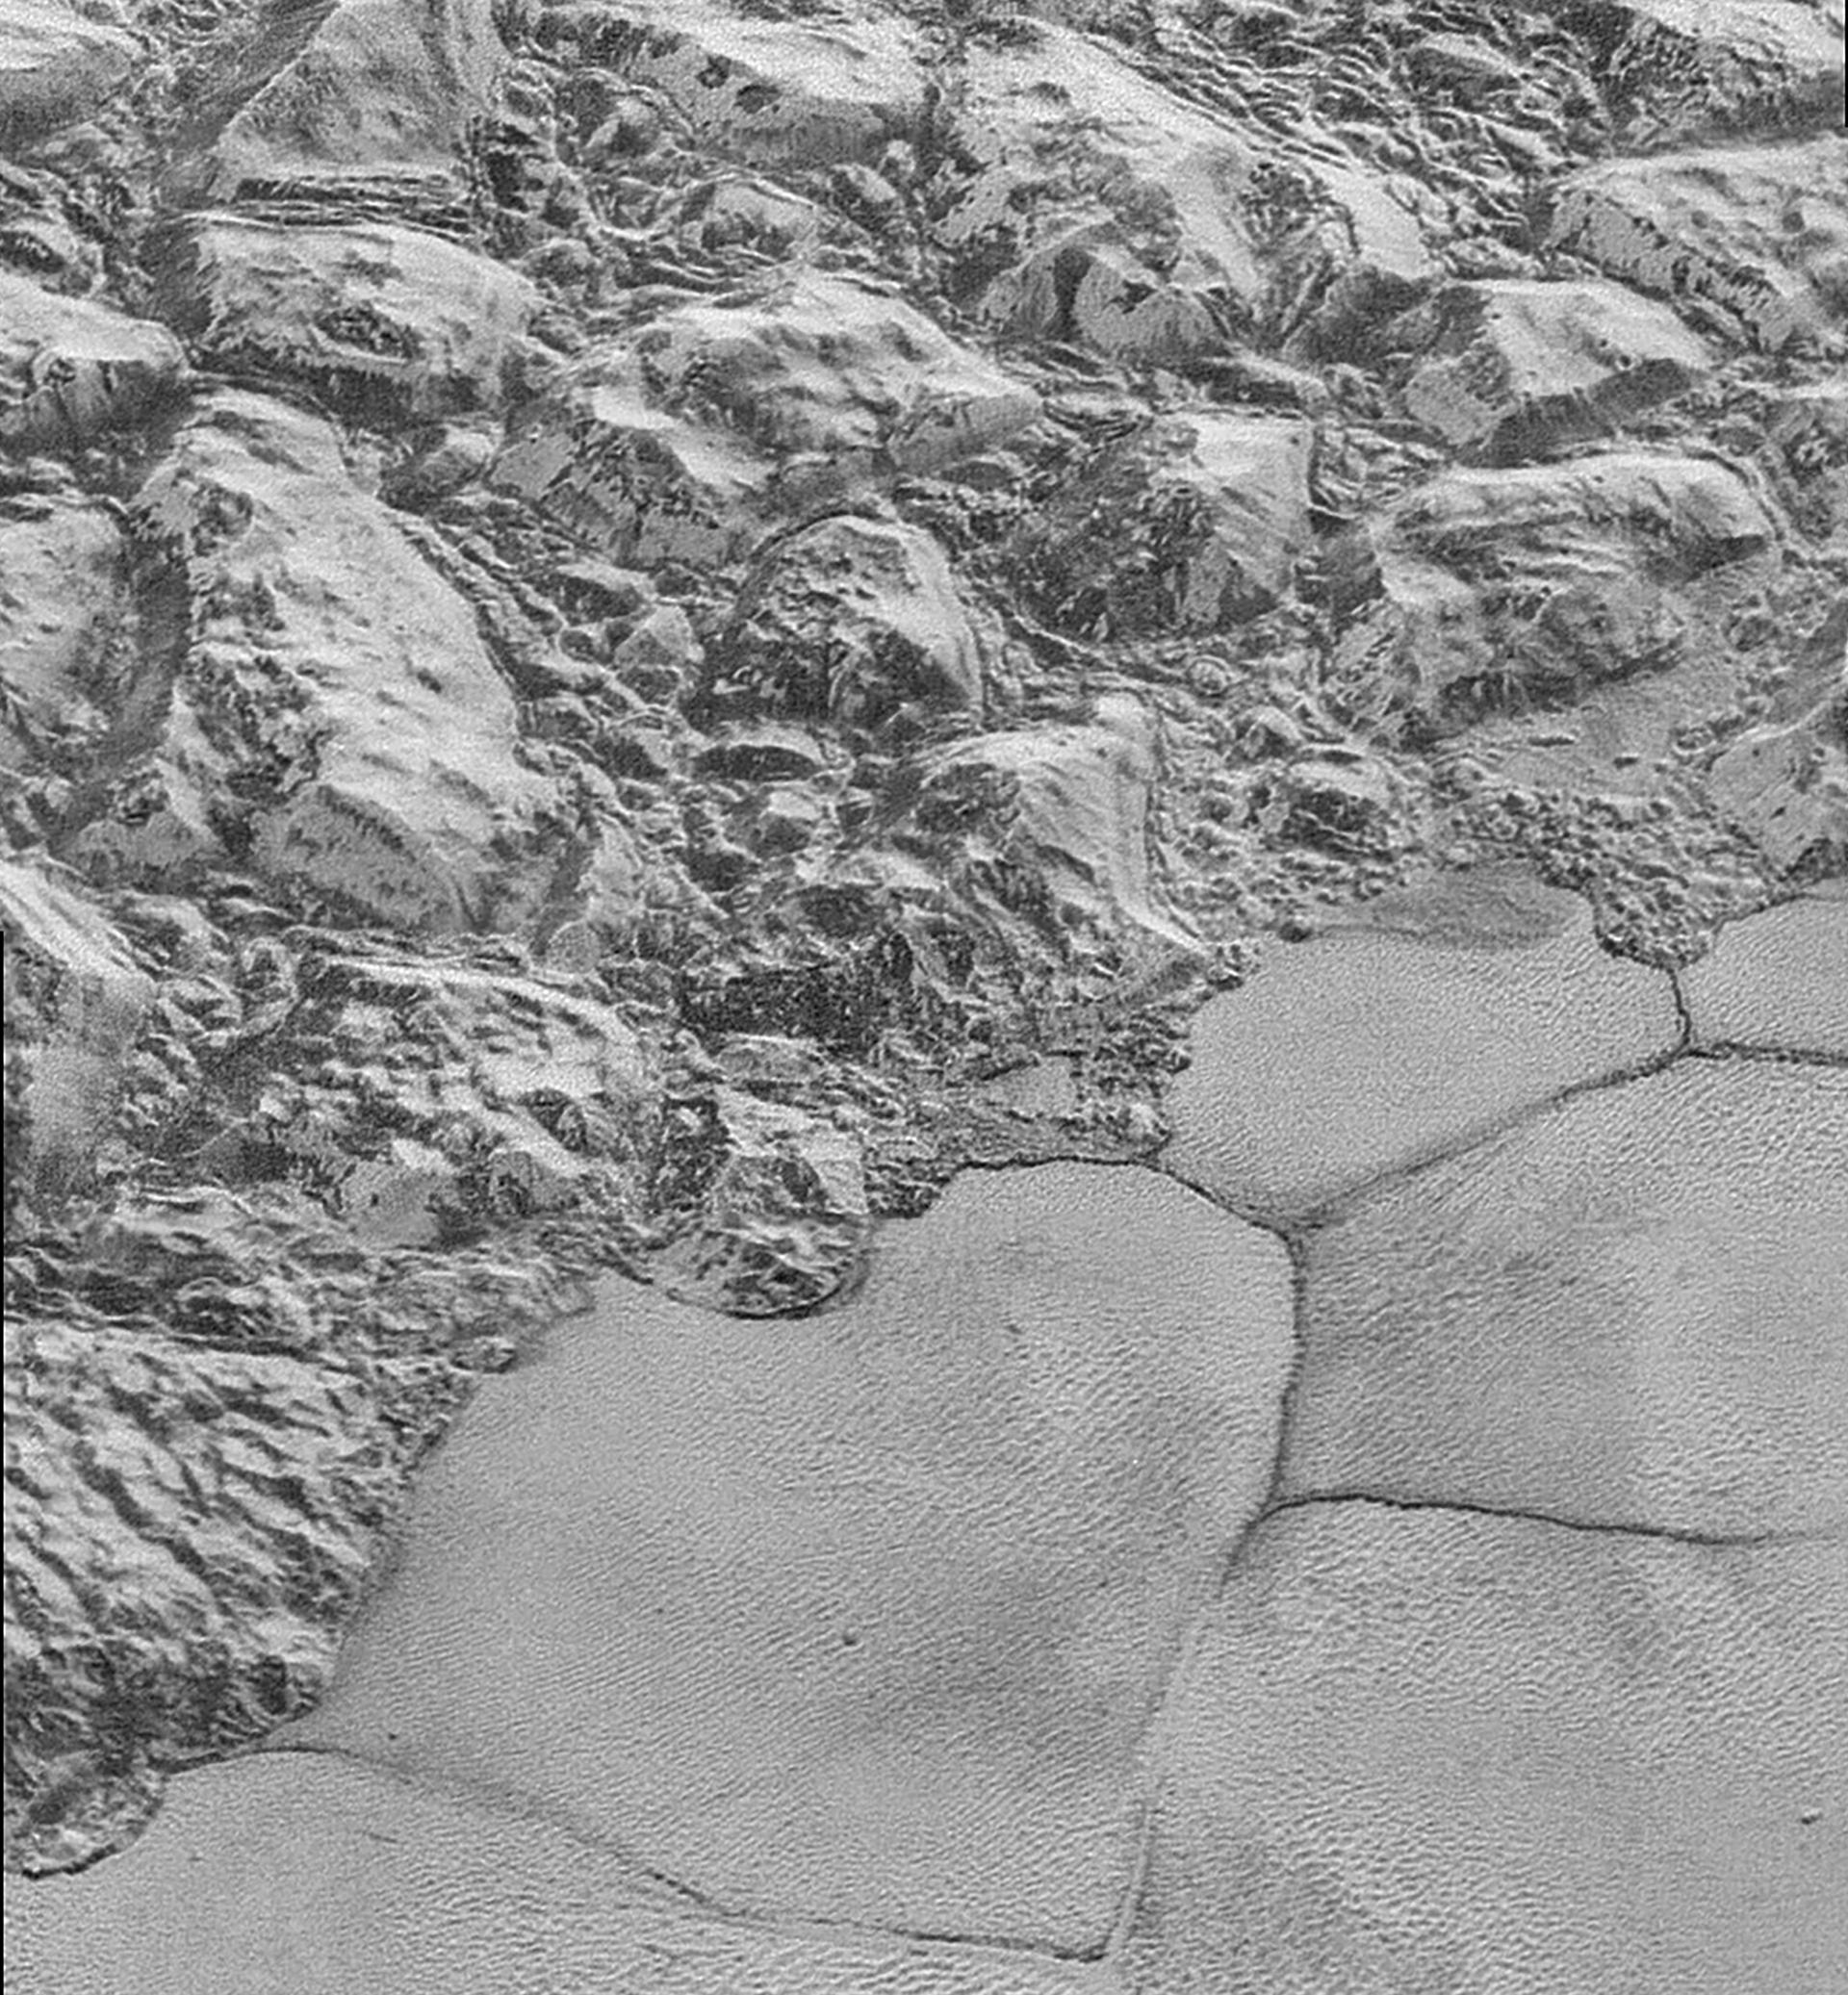 In this highest-resolution image from NASA’s New Horizons spacecraft, great blocks of Pluto’s water-ice crust appear jammed together in the informally named al-Idrisi mountains. Image by NASA/JHUAPL/SwRI